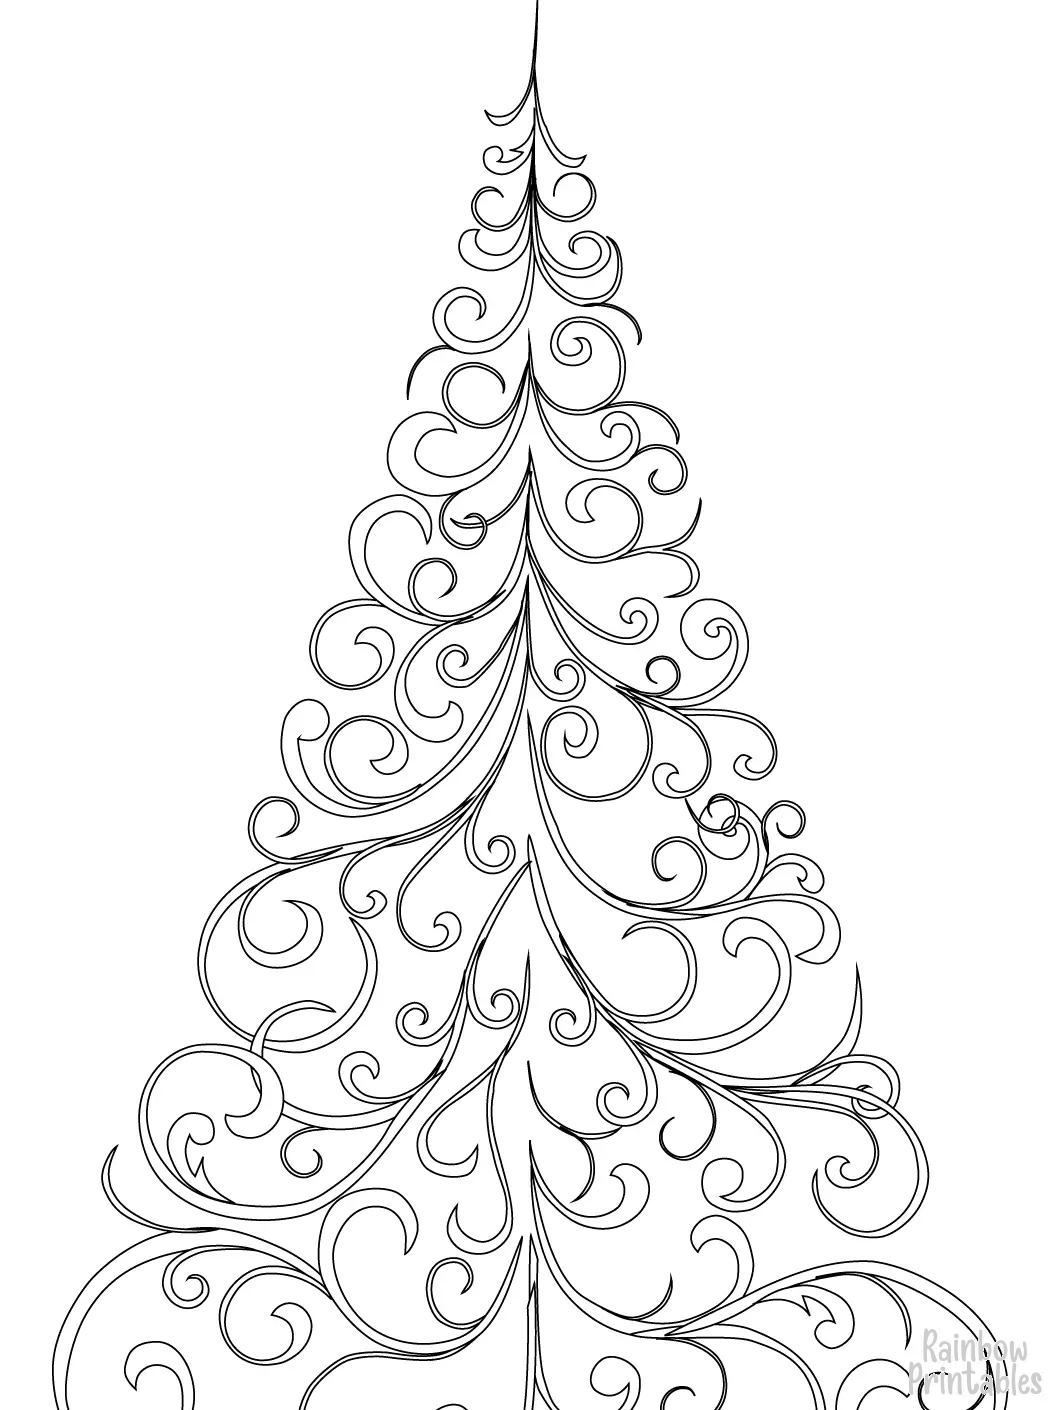 Swirly Tree Coloring Page Christmas Xmas Coloring Activities for Kids